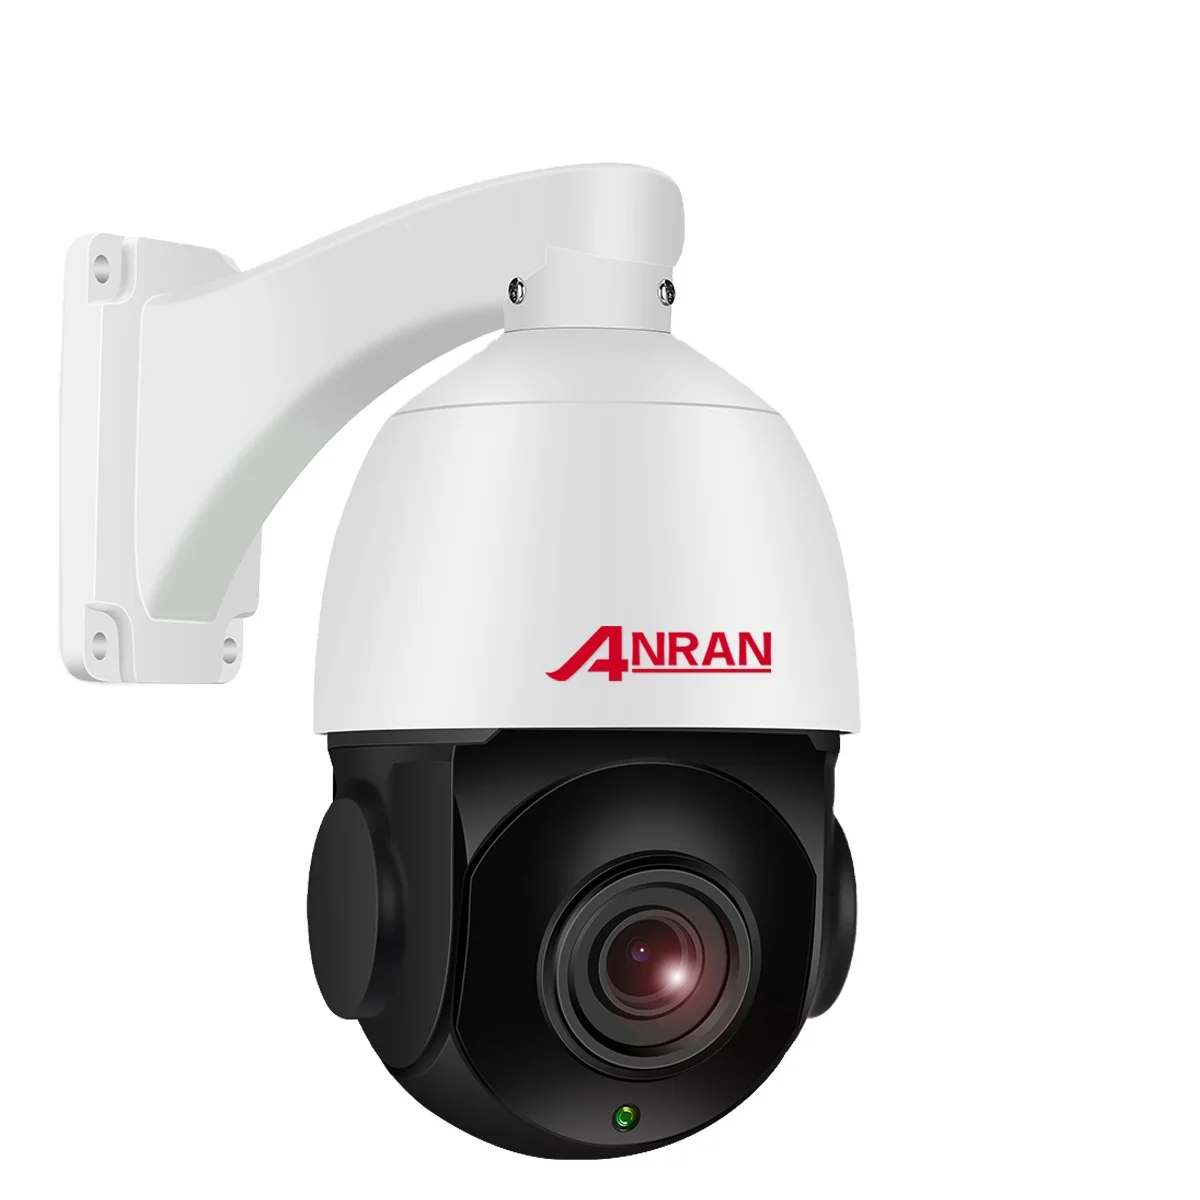 ANRAN 5MP WIFI IP Camera Outdoor CCTV Pan/Tilt Home Security System Auido Night Vision 